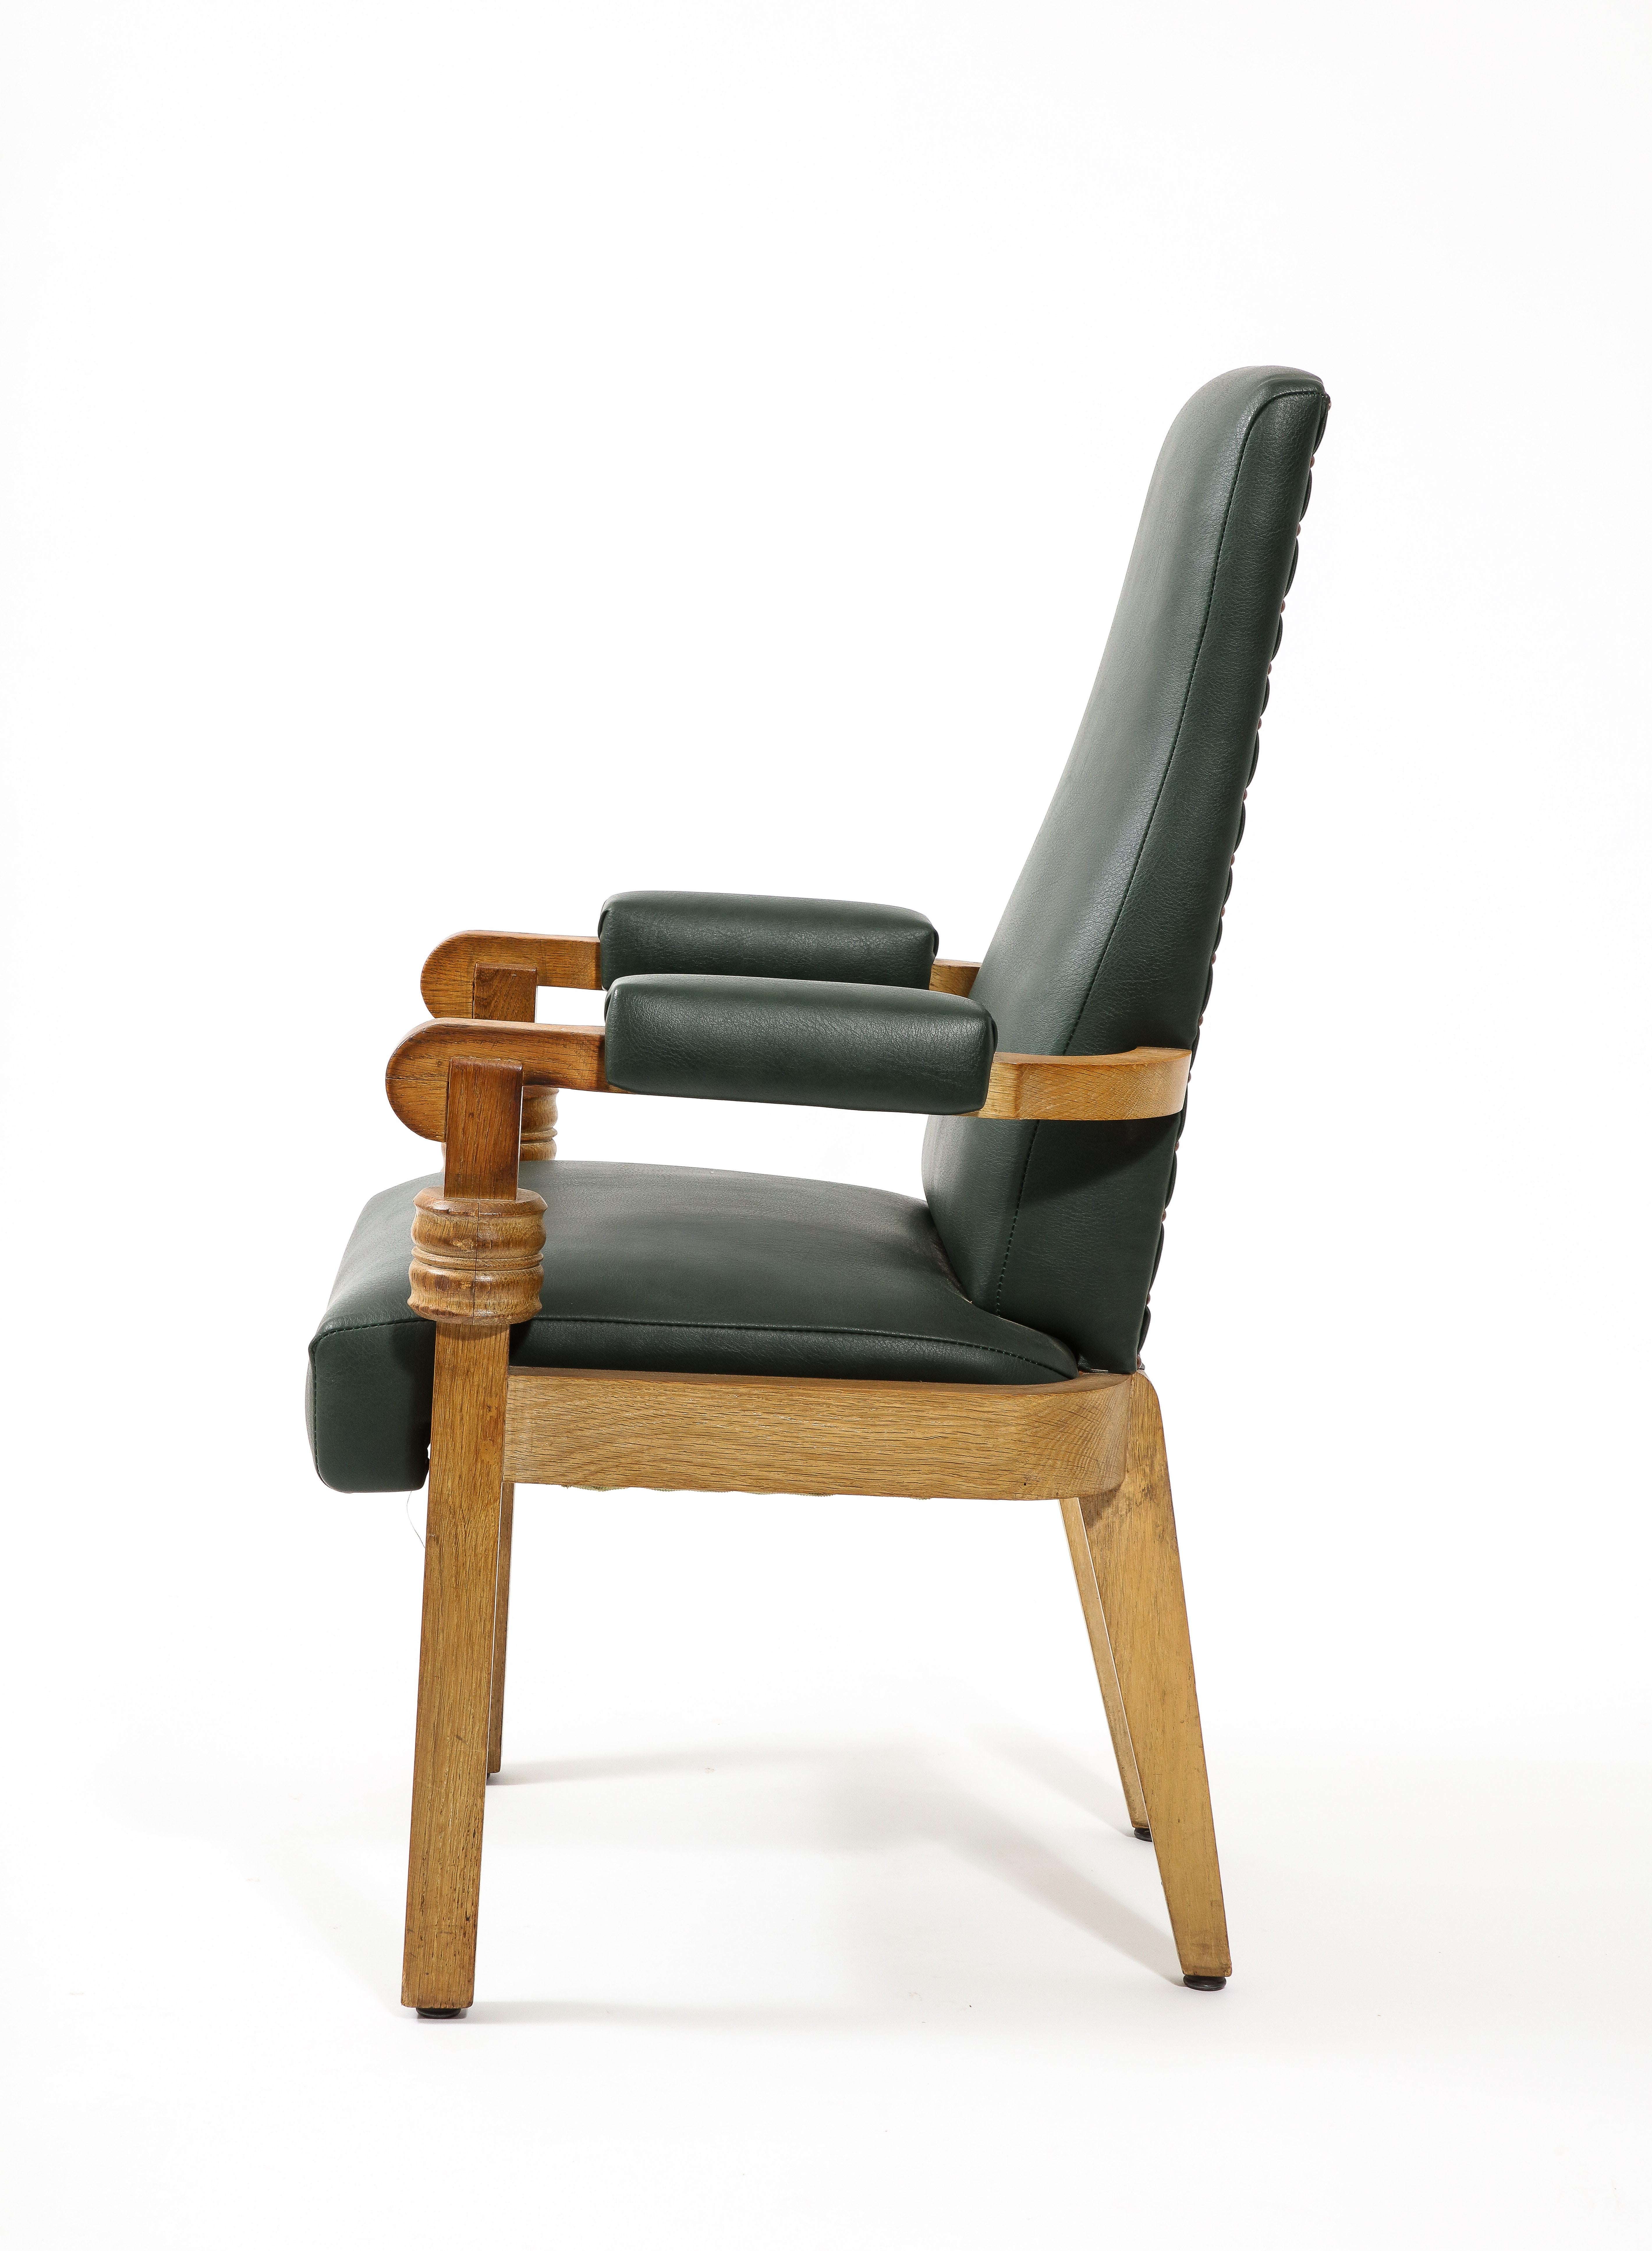 Solid oak armchair with stacking detail in original patina and upholstery.

